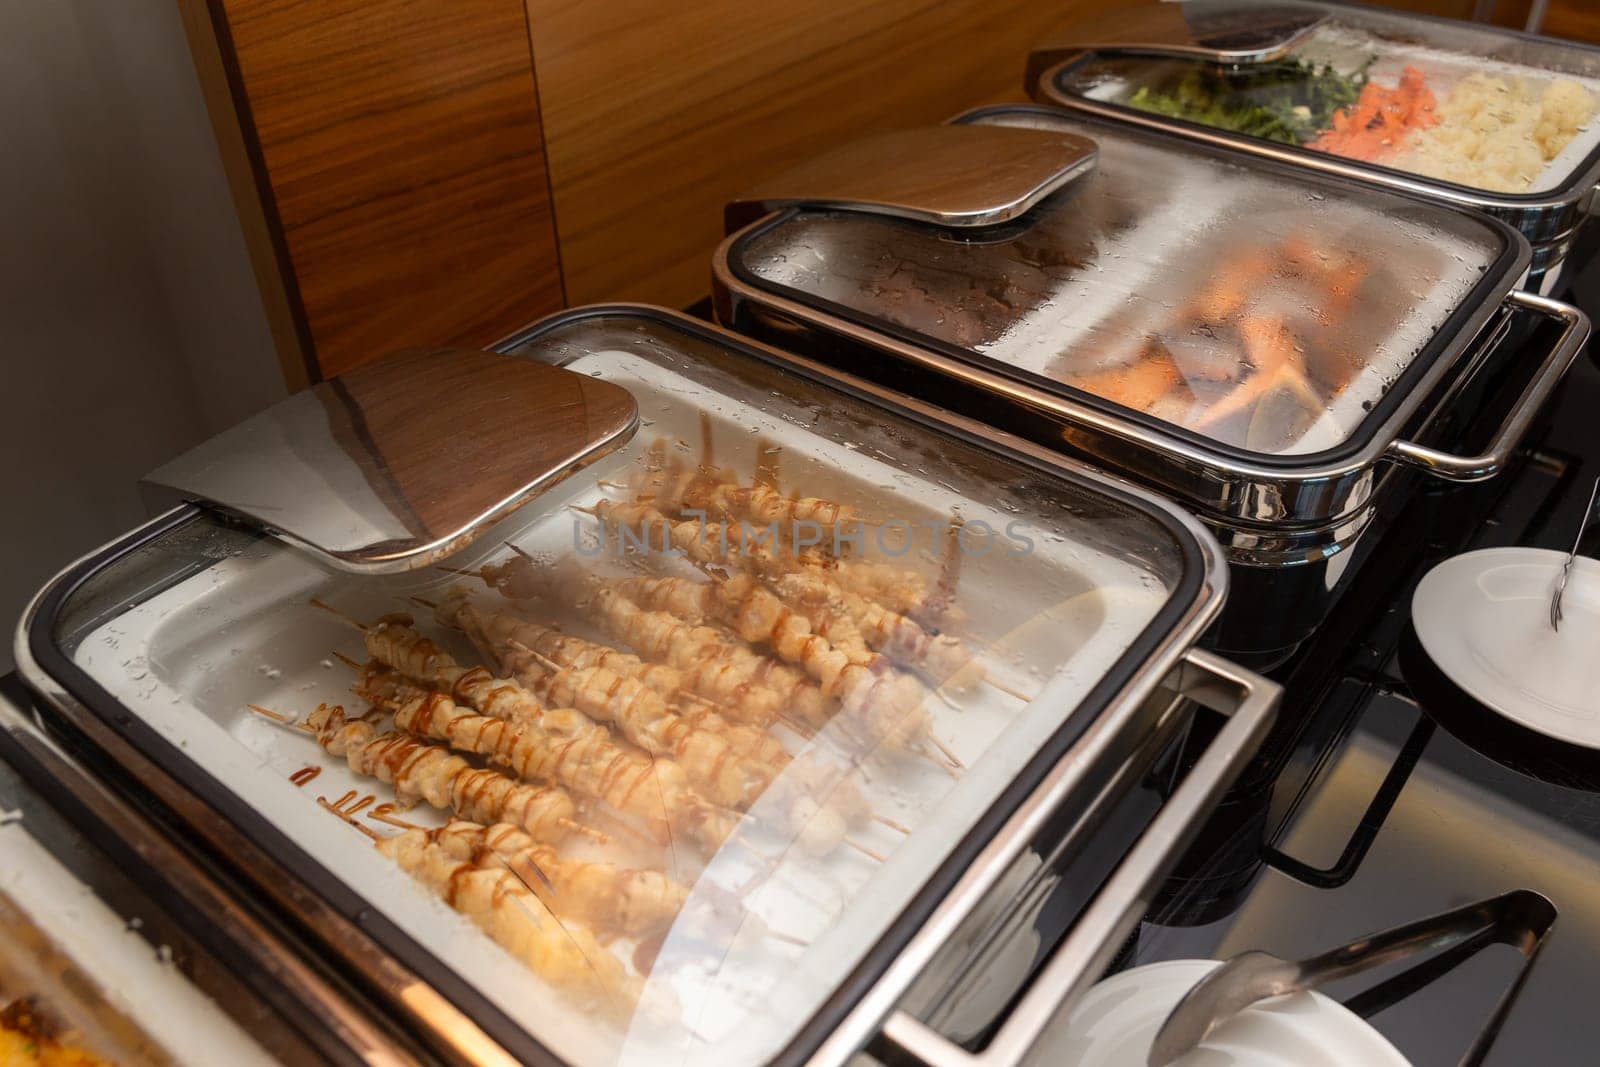 Fried meat on skewers and other appetizers in a food warmer on a buffet table in a hotel restaurant. by BY-_-BY